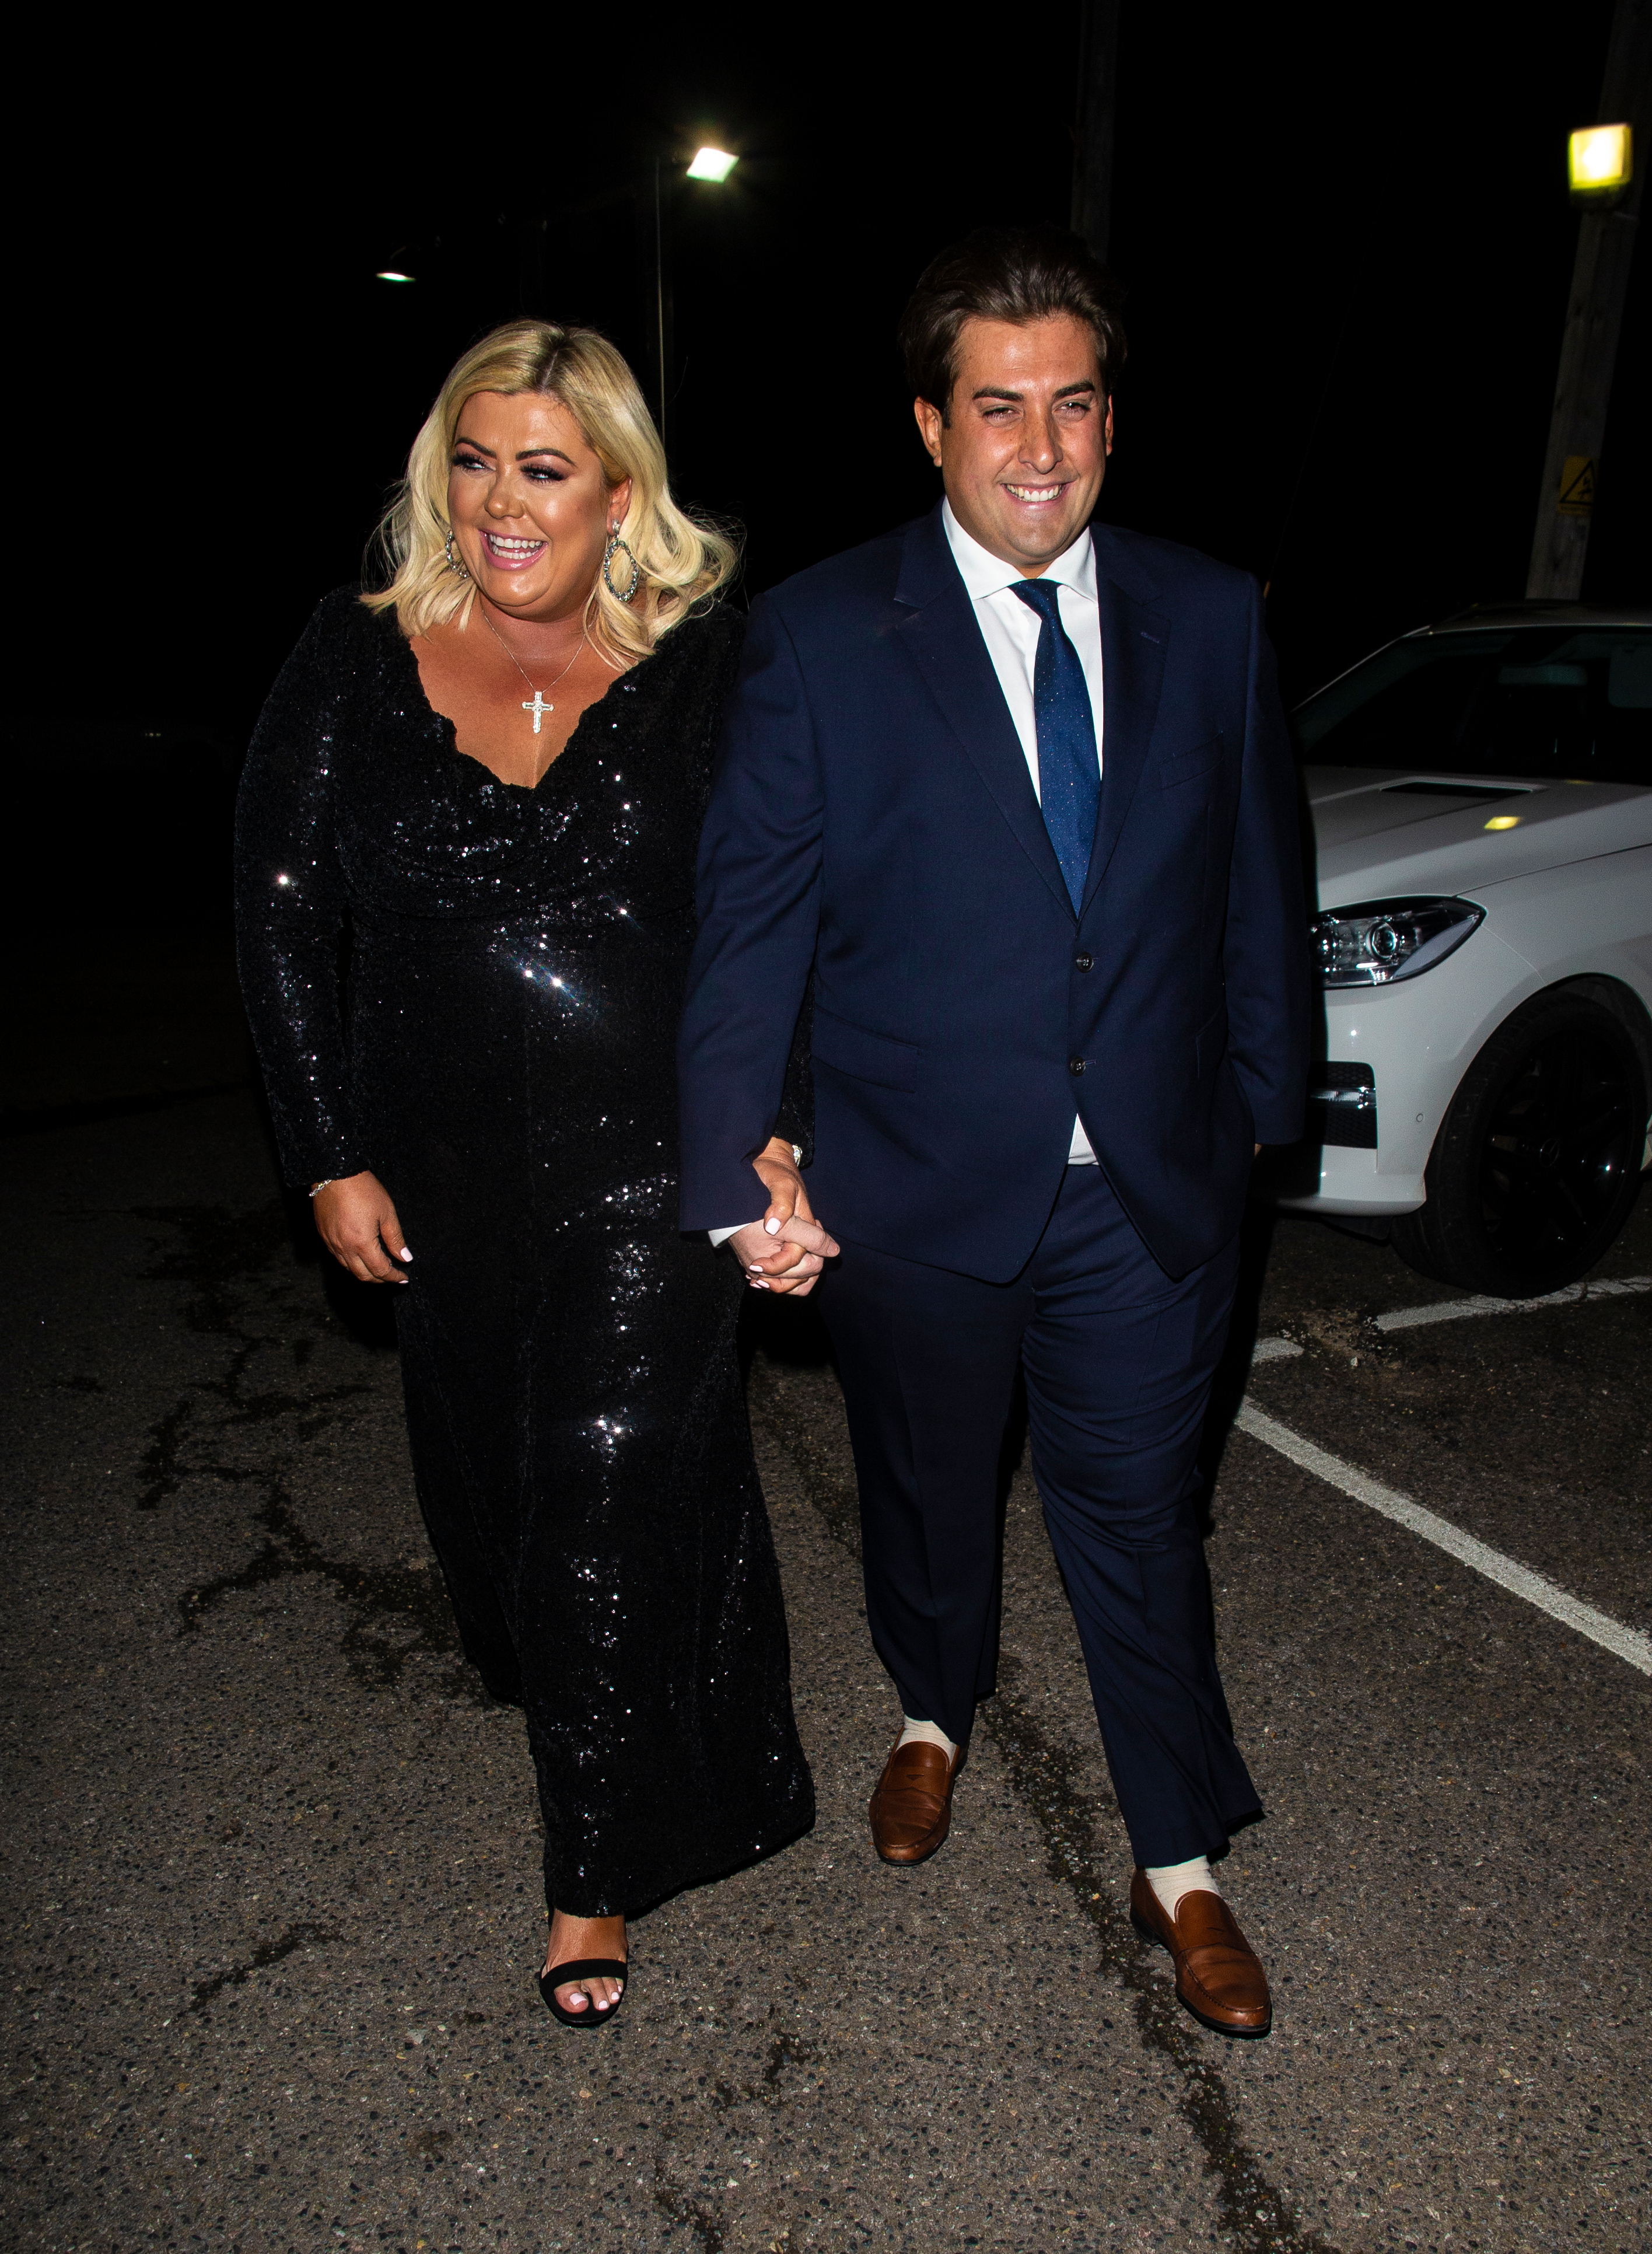 She has been in an on/off relationship with James Argent for three years